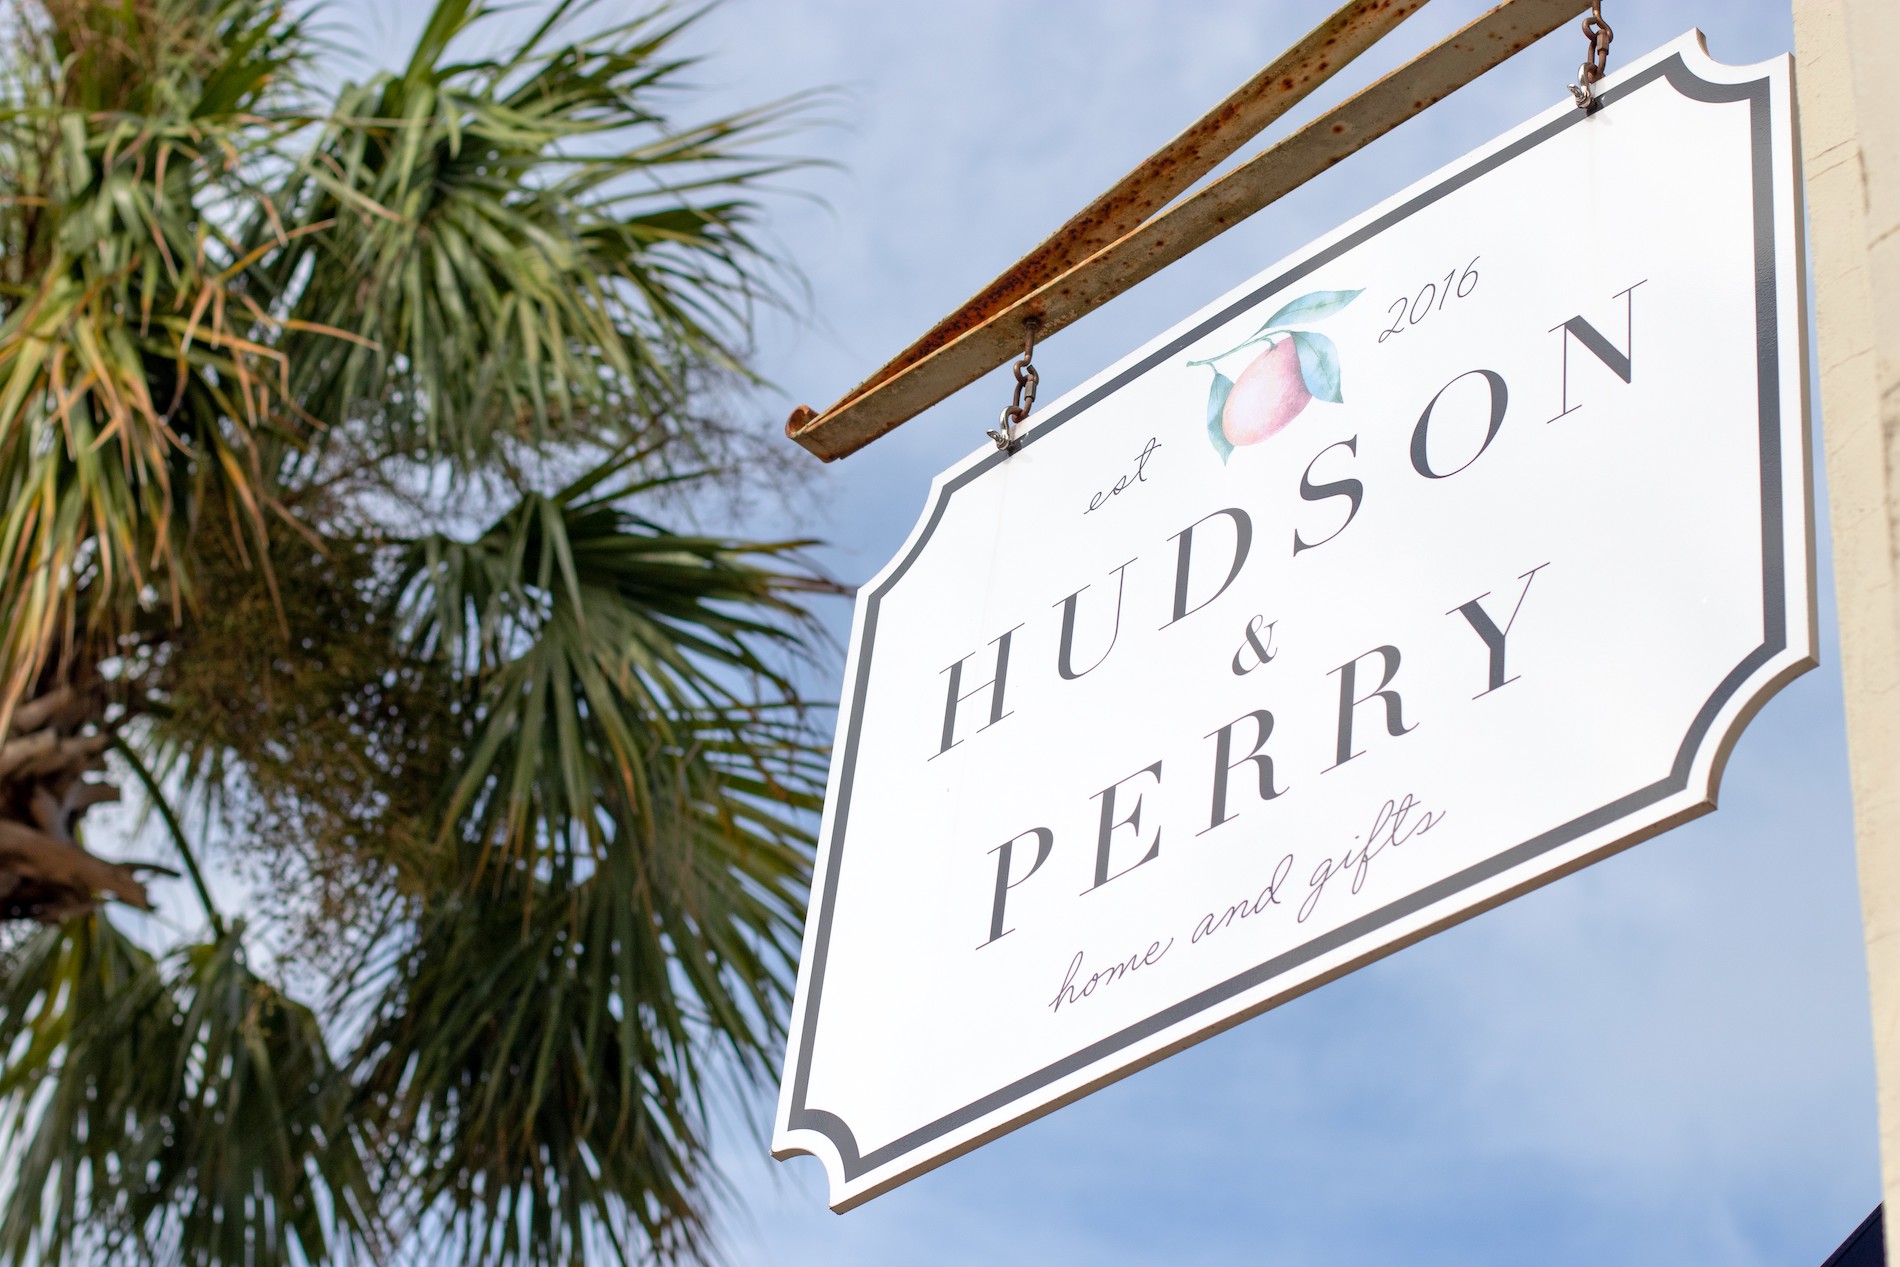 Hudson and Perry sign